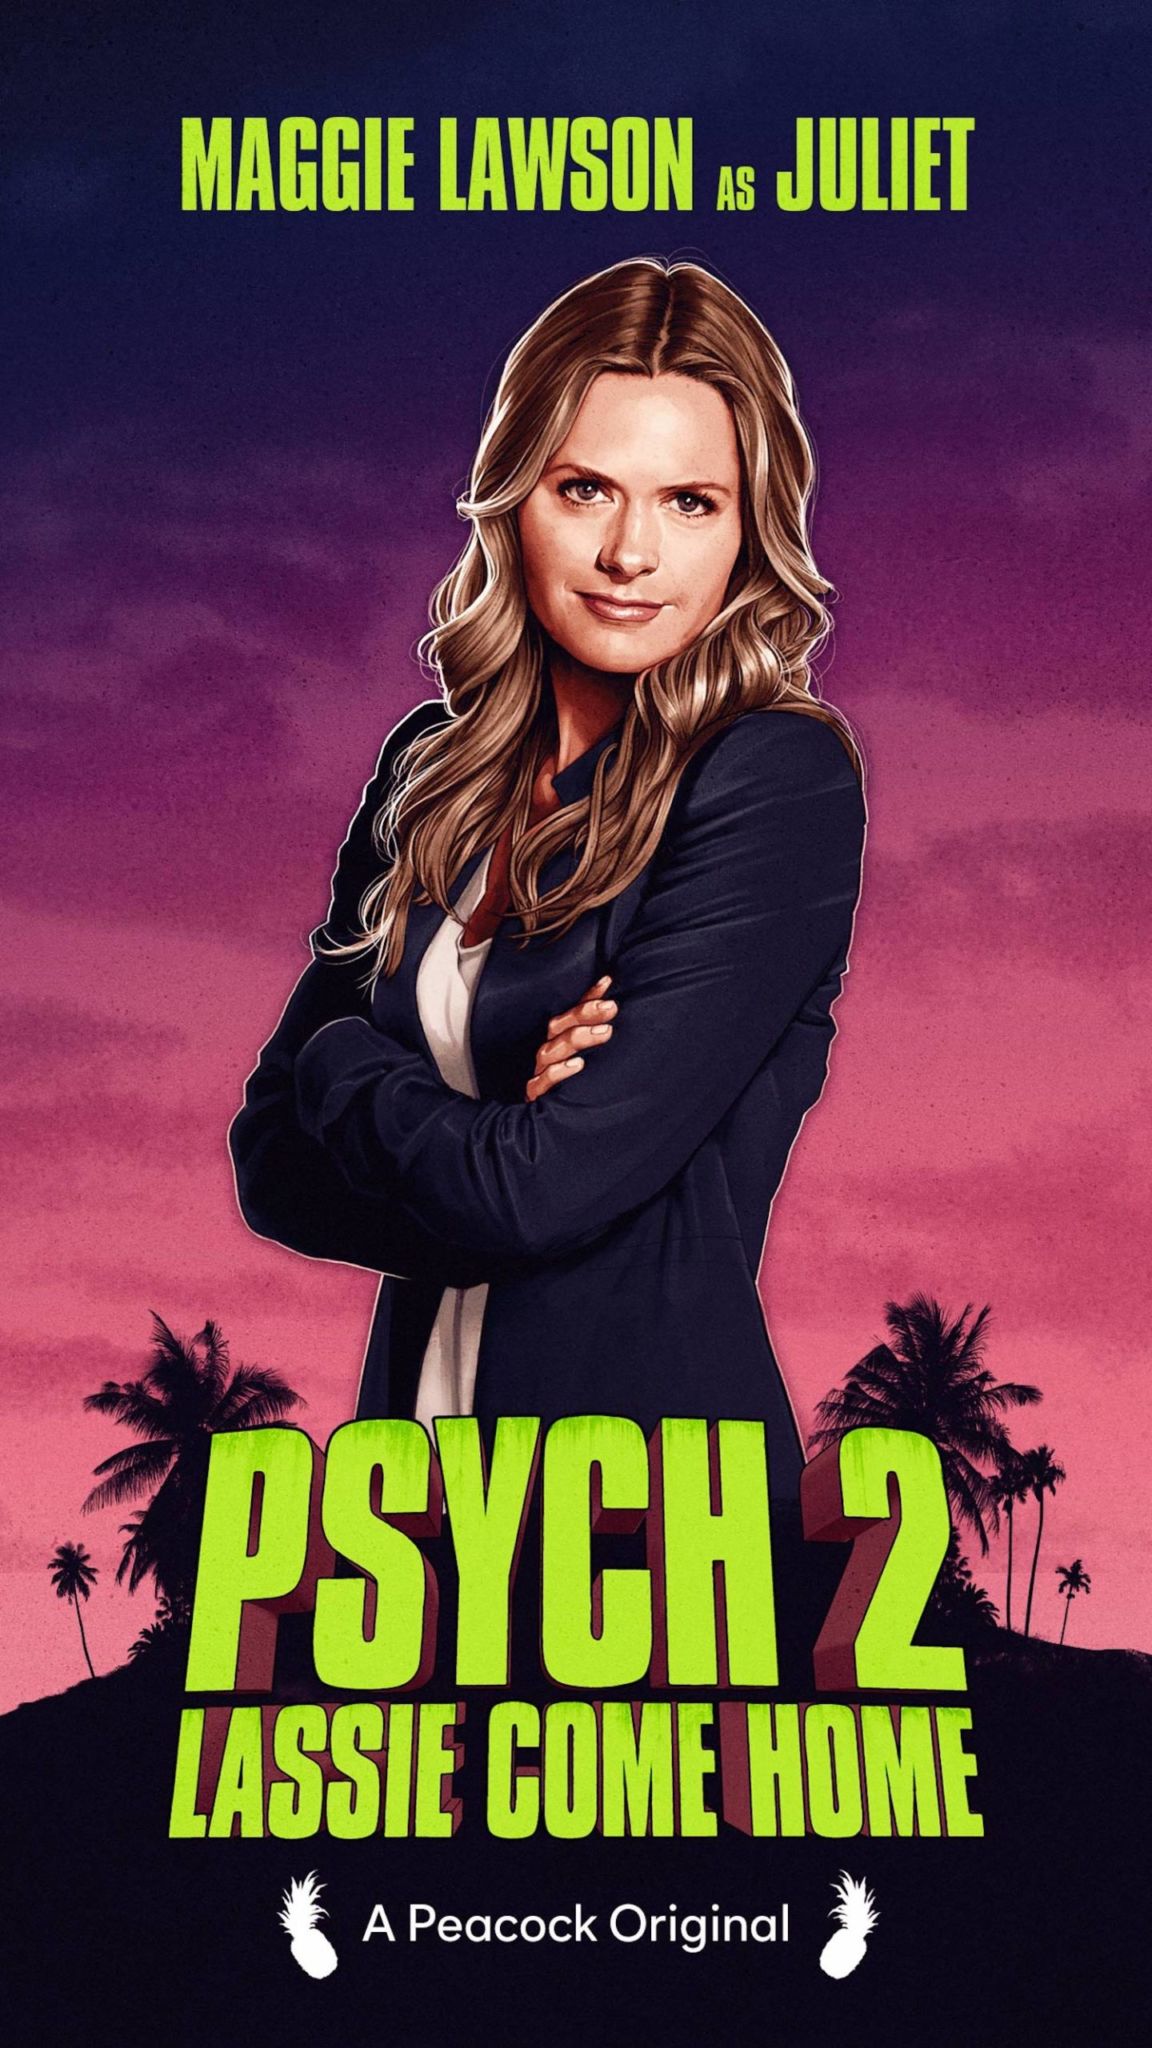 Psych 2 Character Illustration Maggie Lawson Juliet